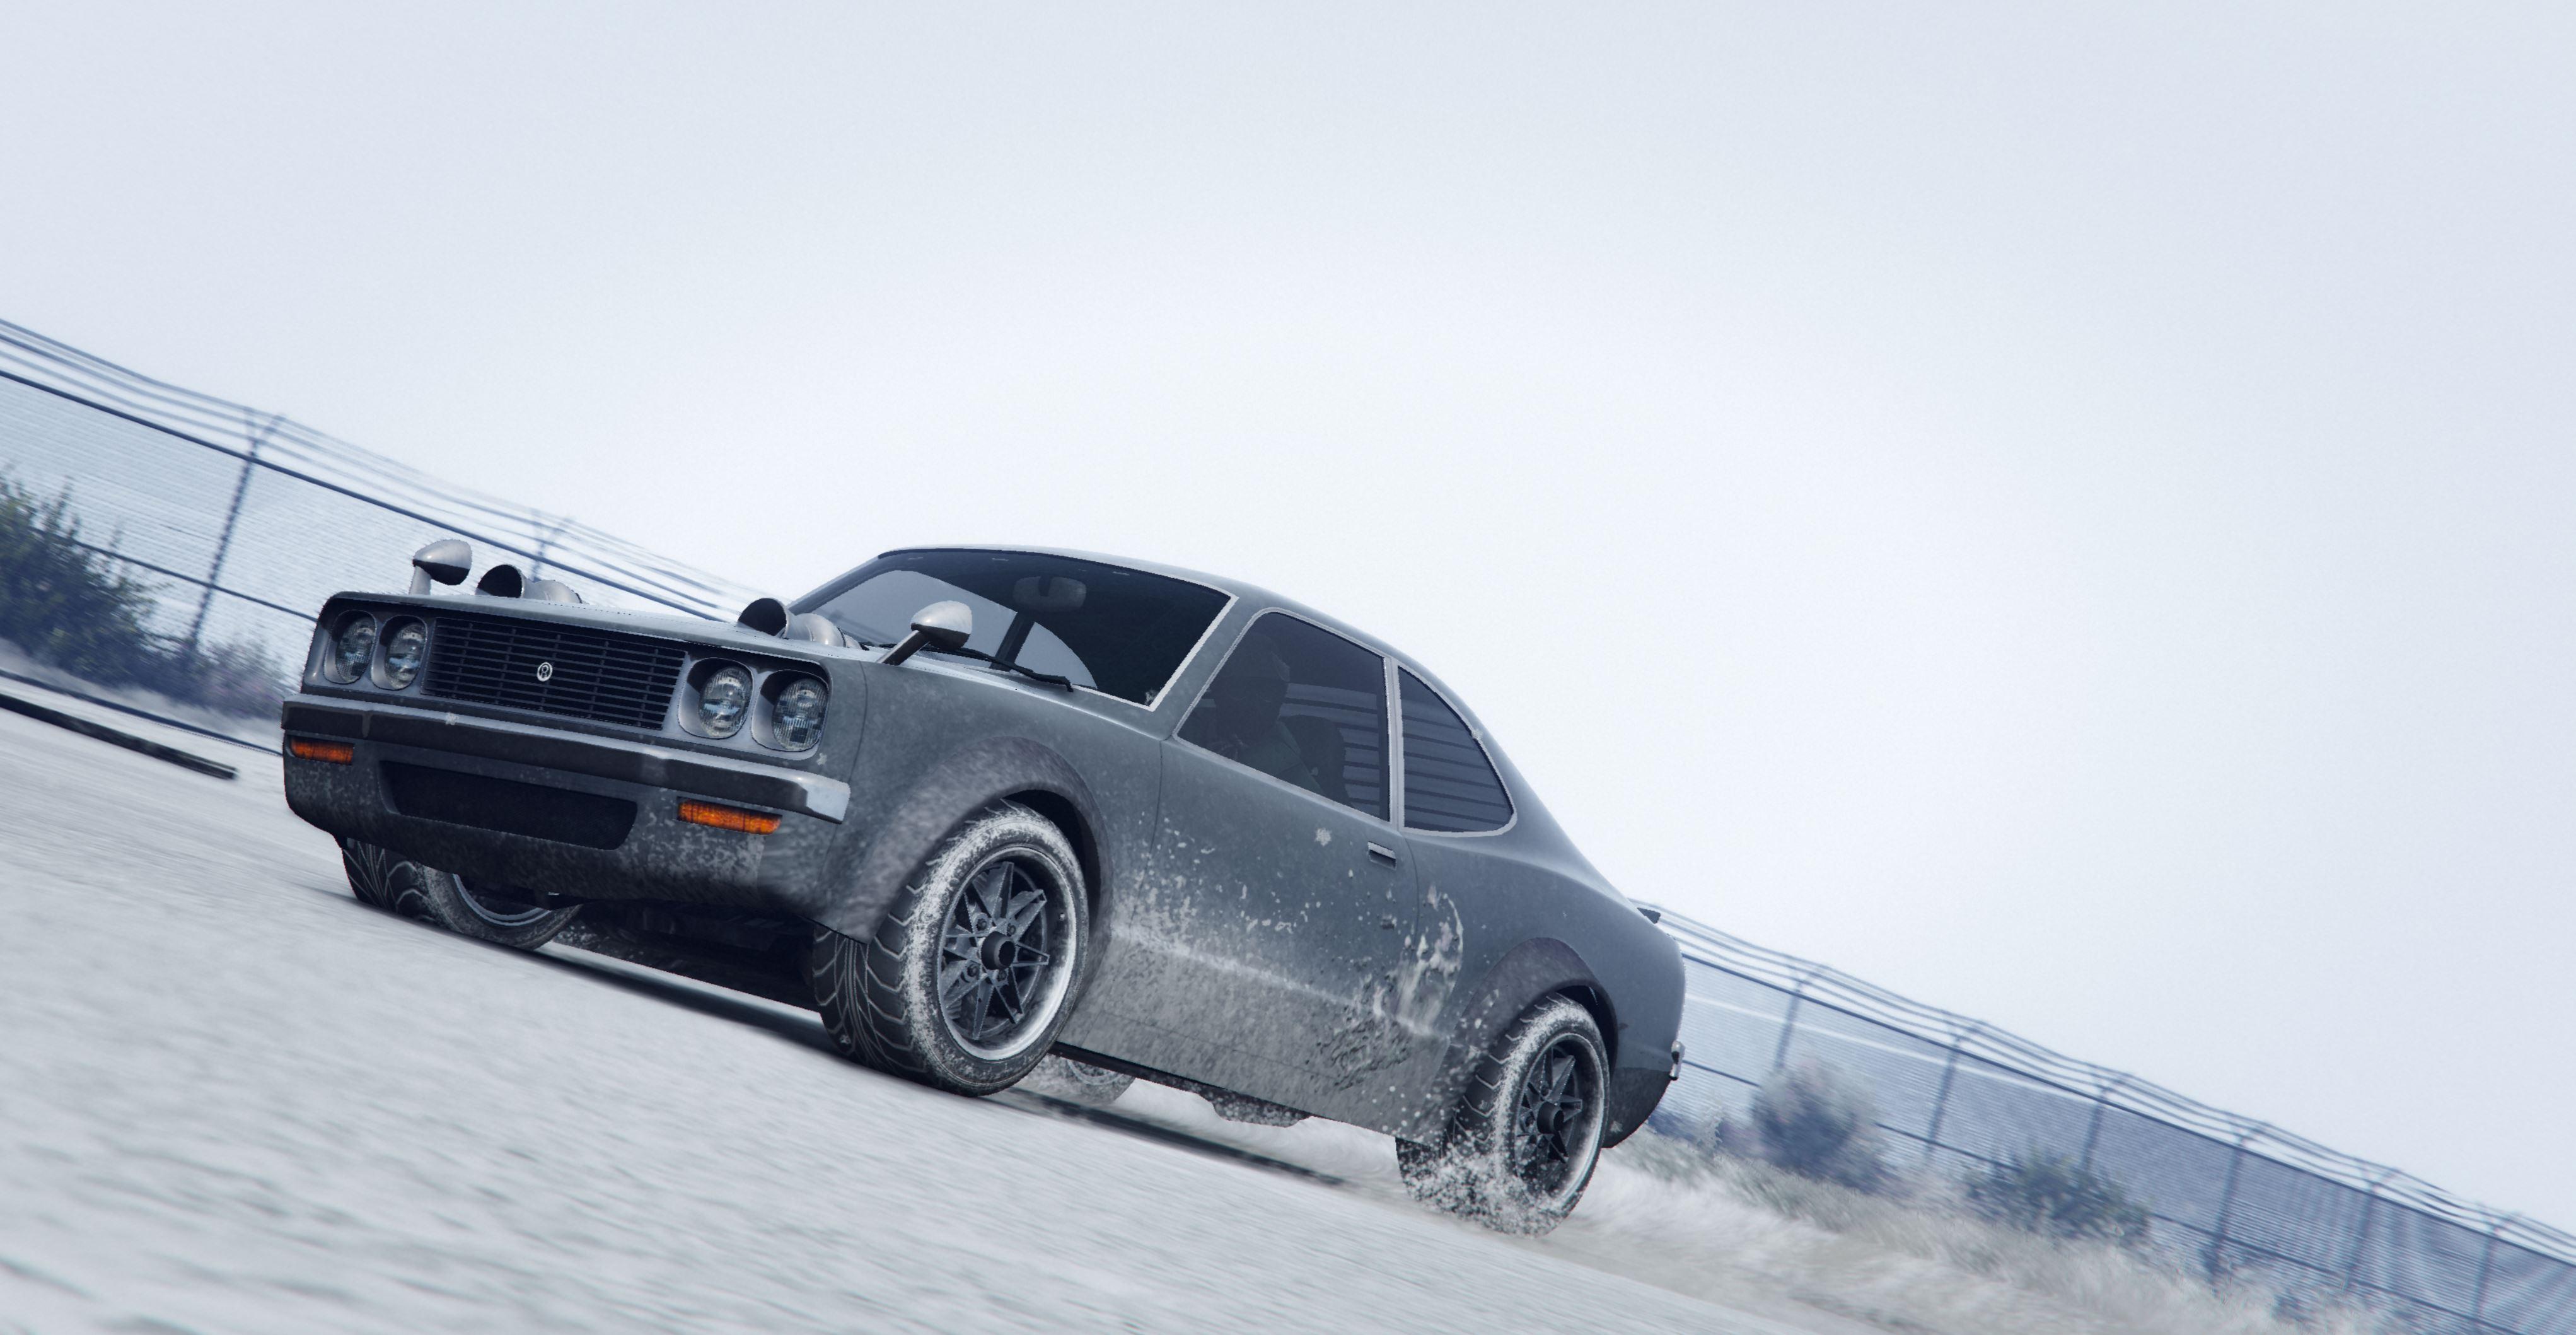 Car In Snow Gta 5 4k 720P HD 4k Wallpaper, Image, Background, Photo and Picture